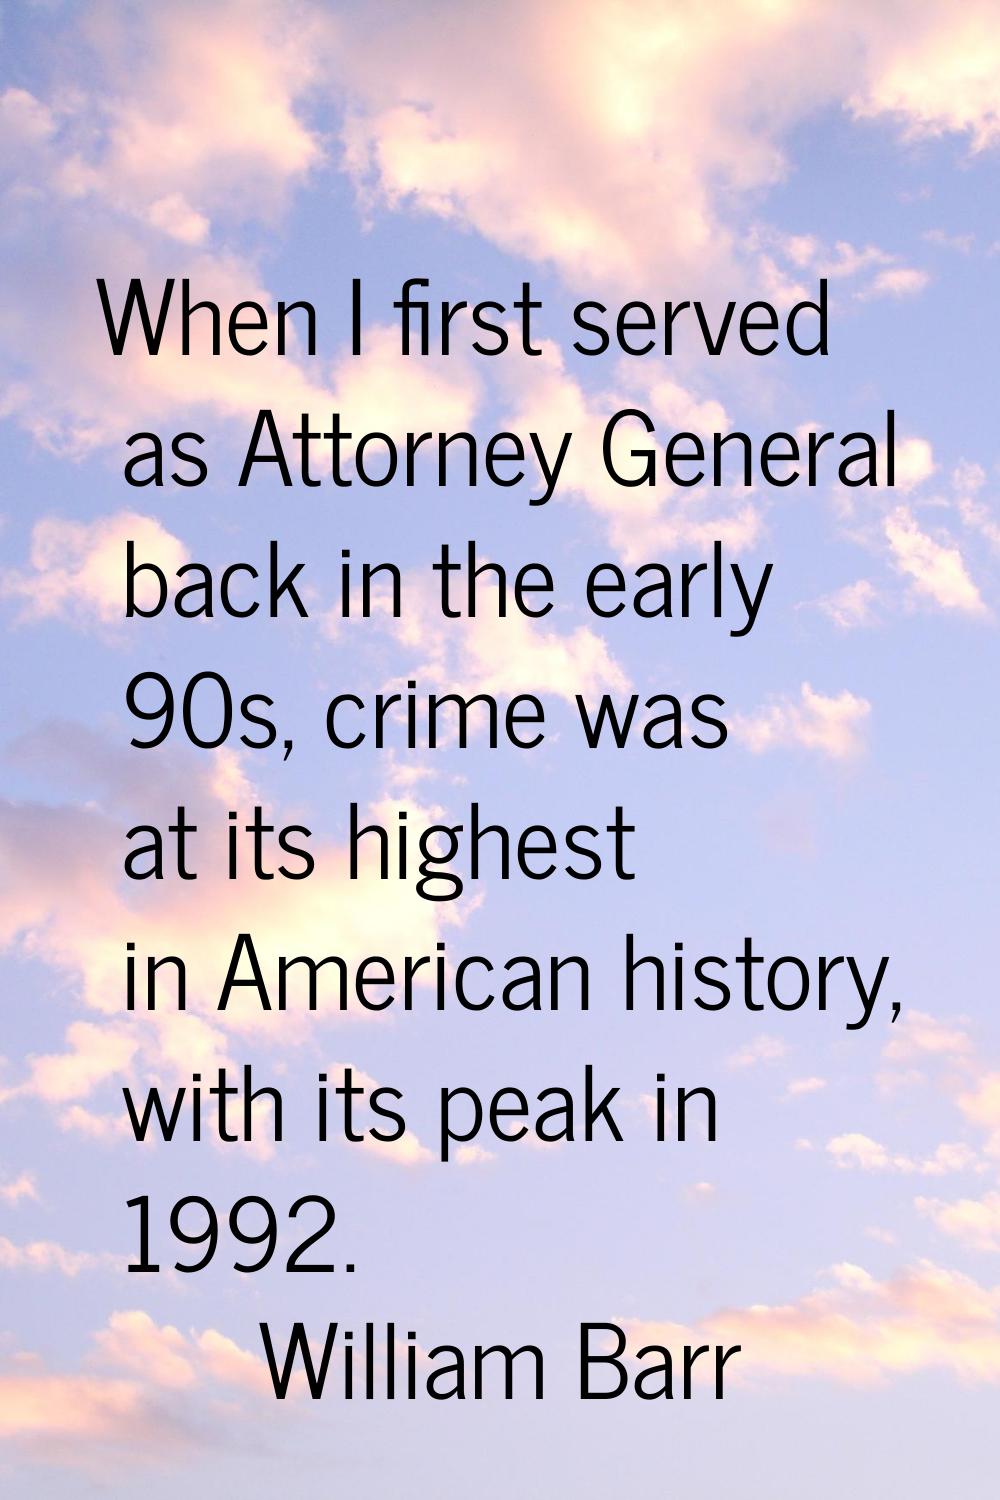 When I first served as Attorney General back in the early 90s, crime was at its highest in American